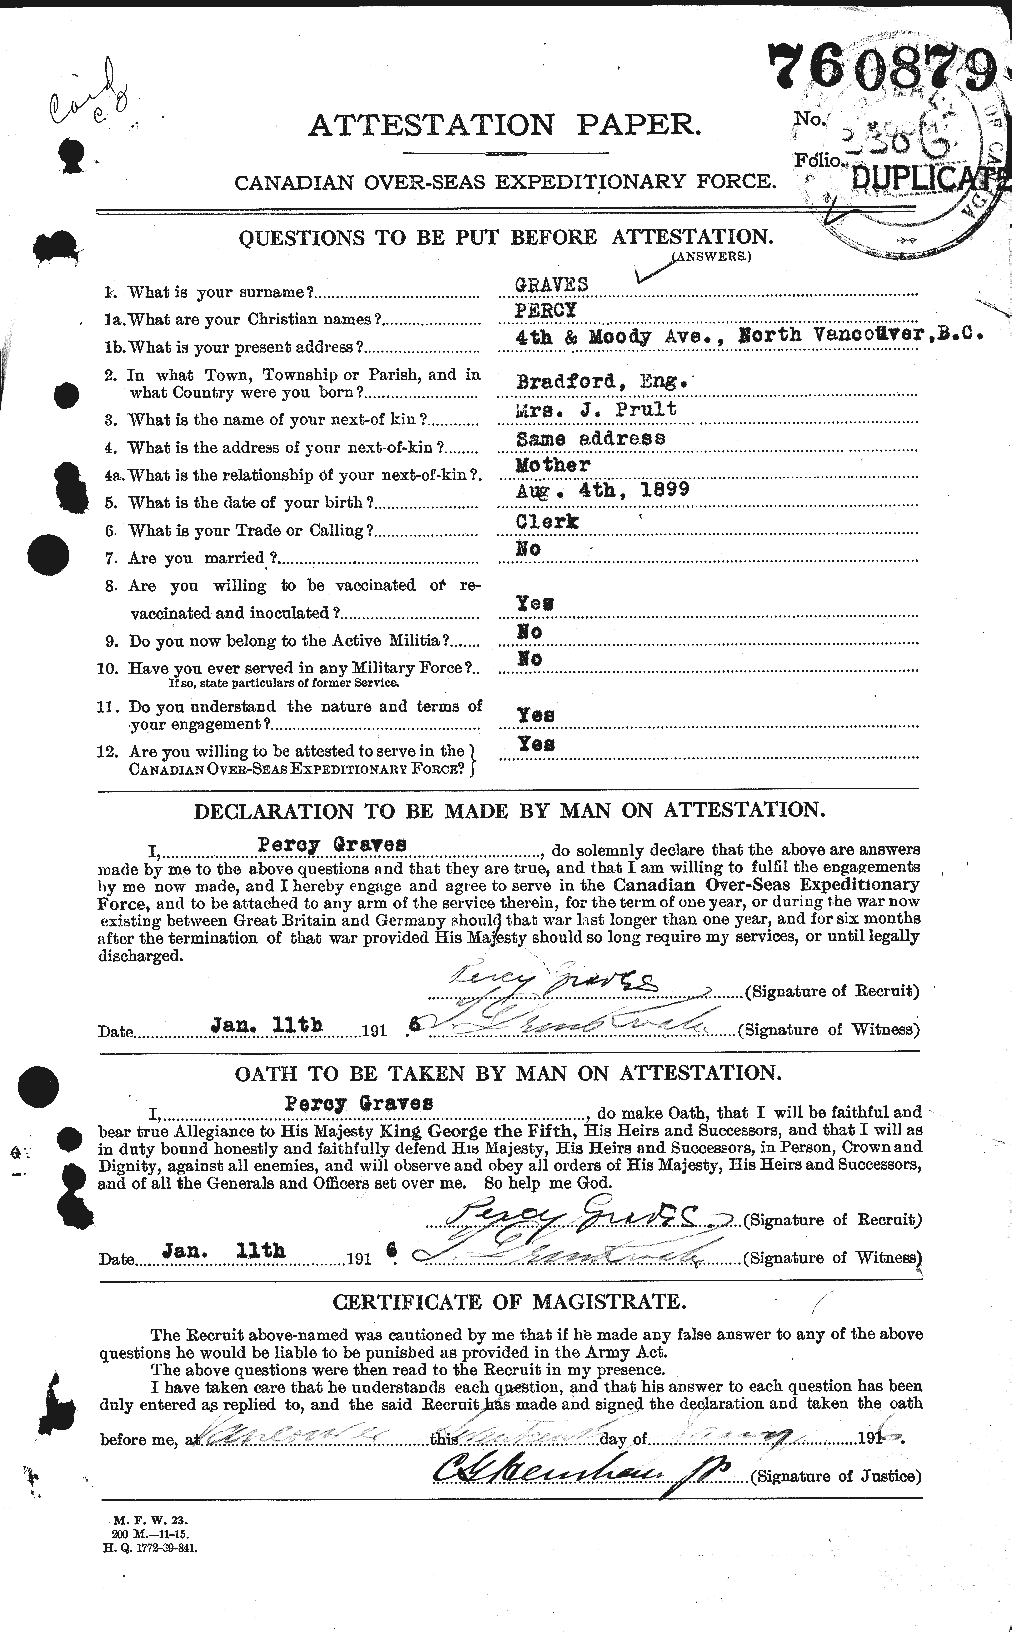 Personnel Records of the First World War - CEF 359838a